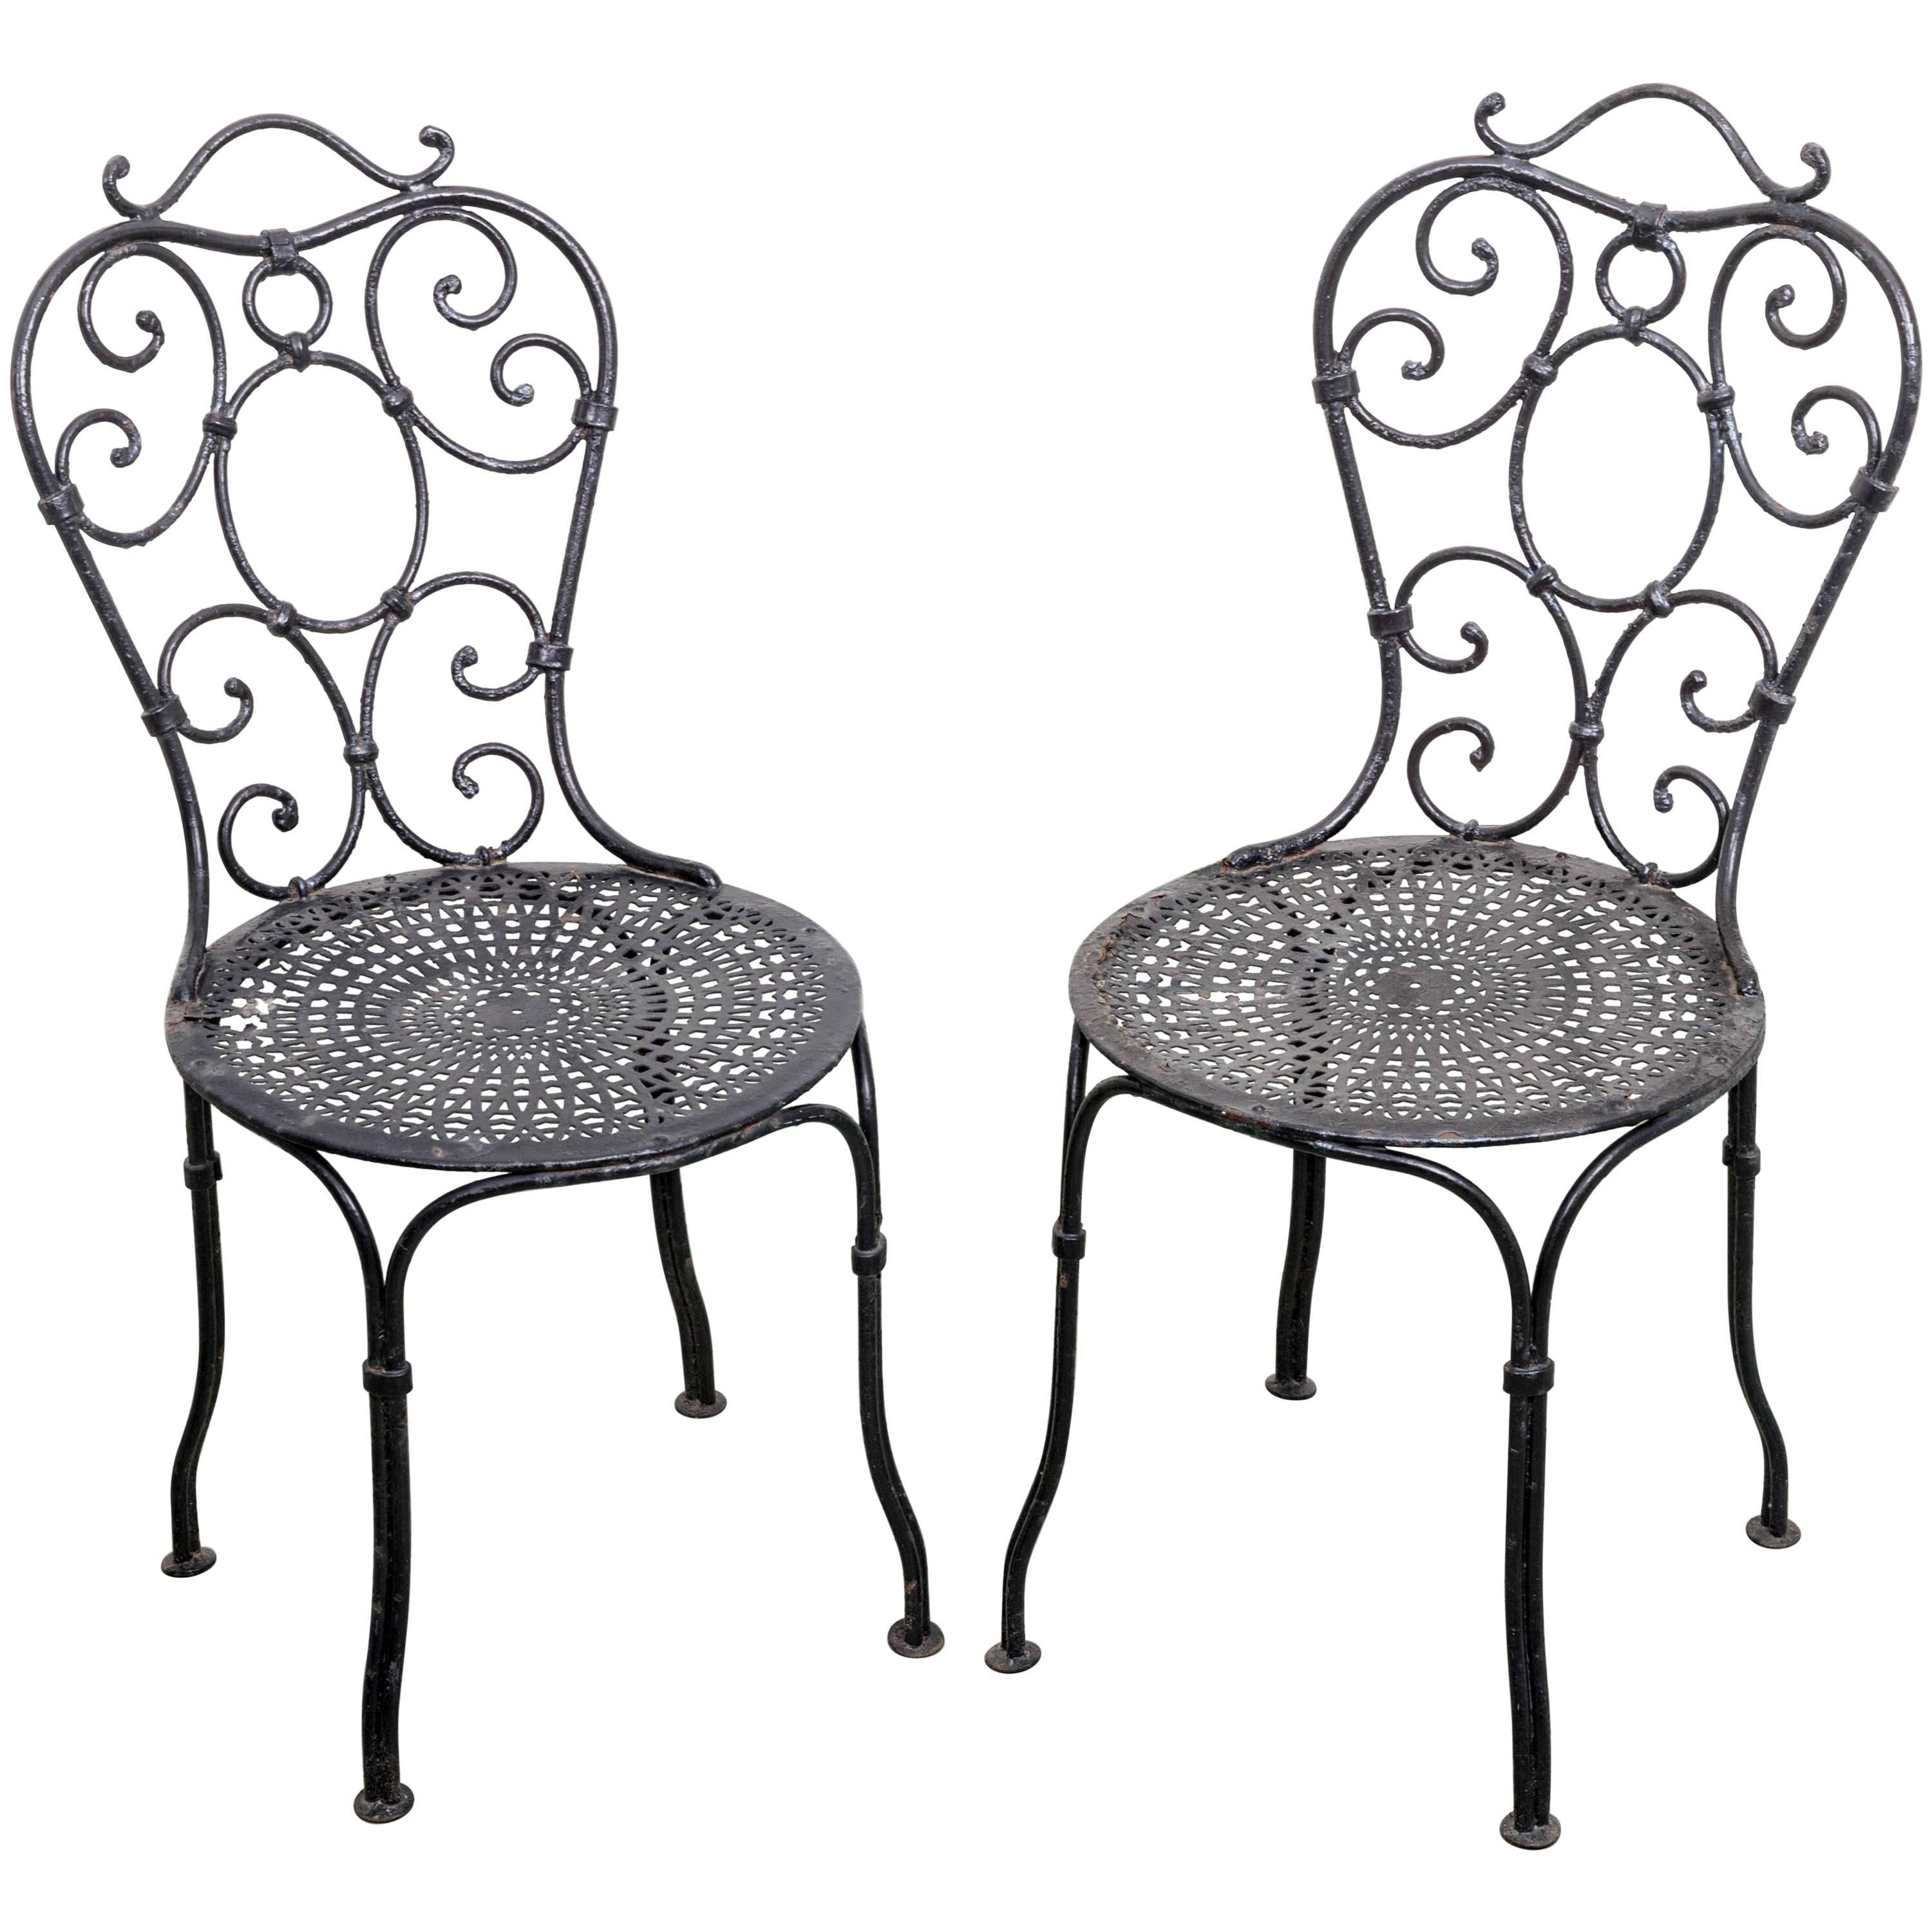 Early Pair of 19th Century French Wrought Iron Garden Chairs For Sale